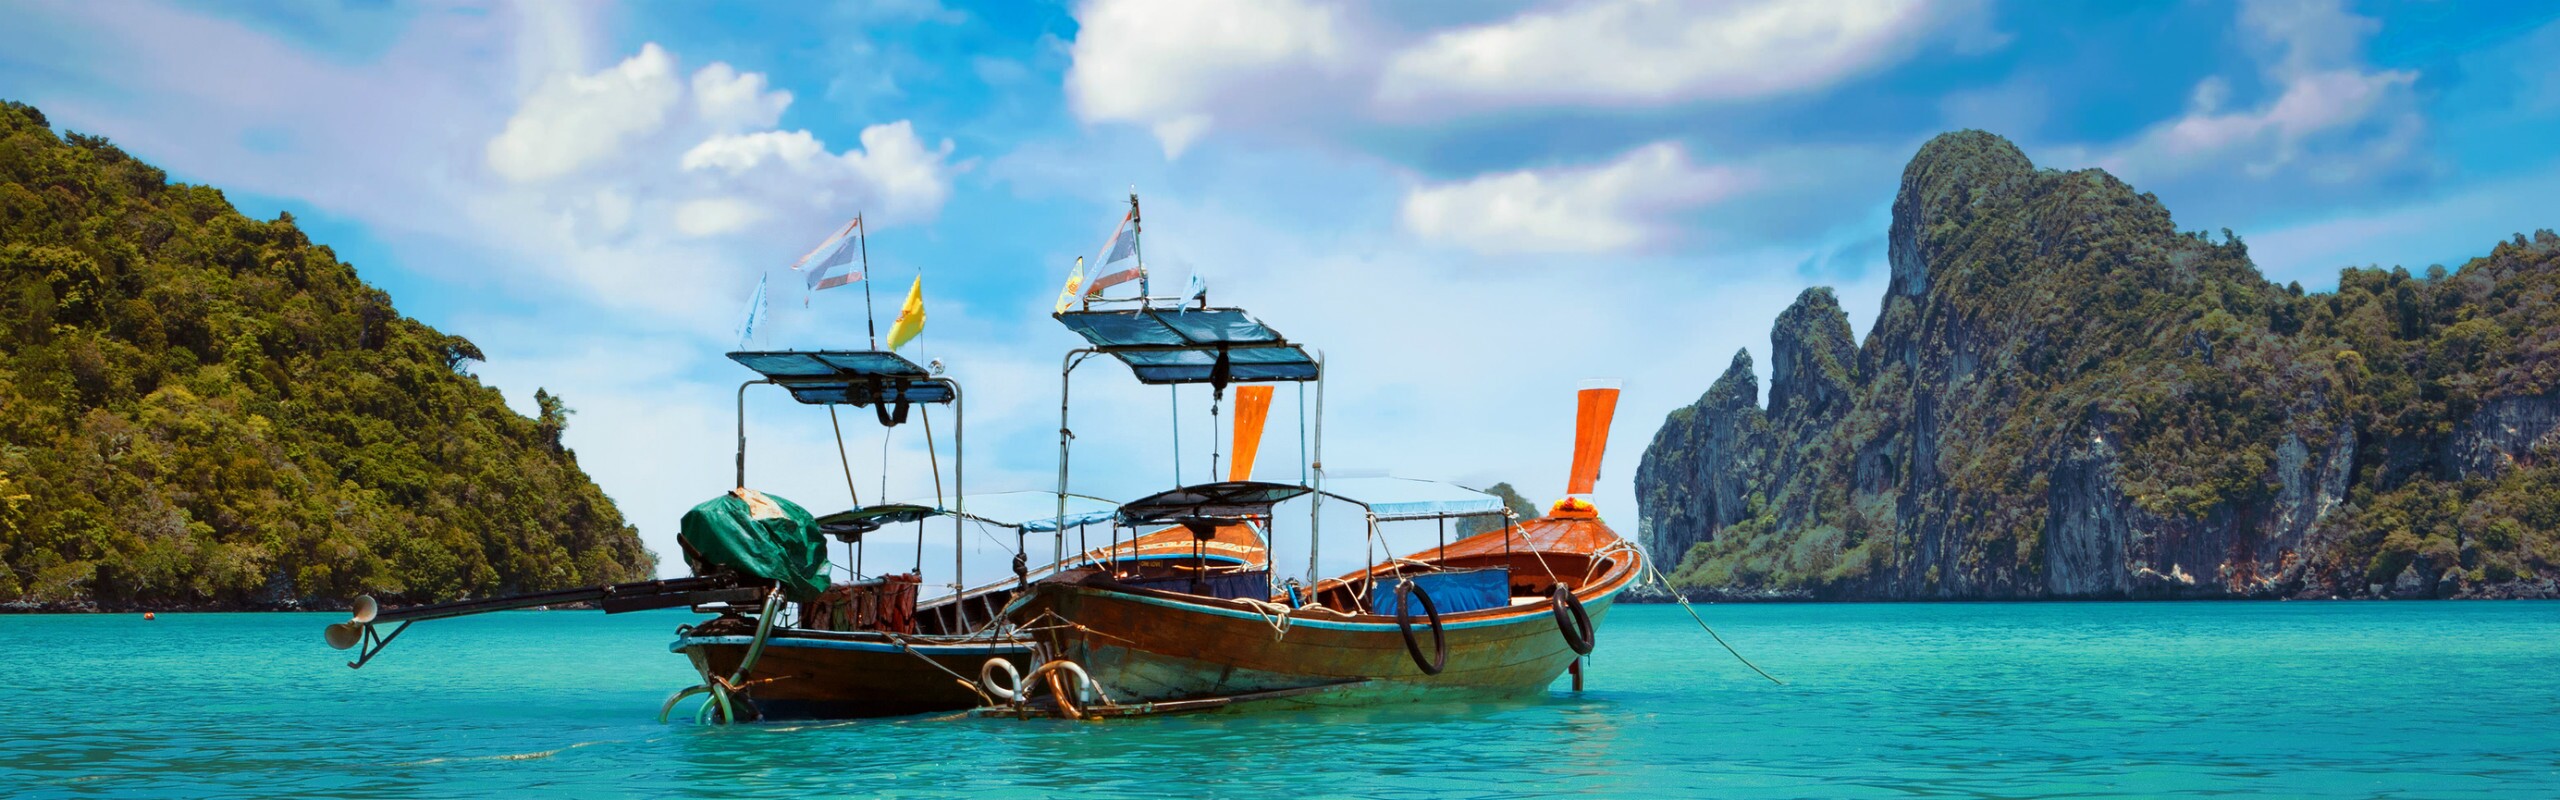 26 Things to Do (and Not to Do) in Phuket